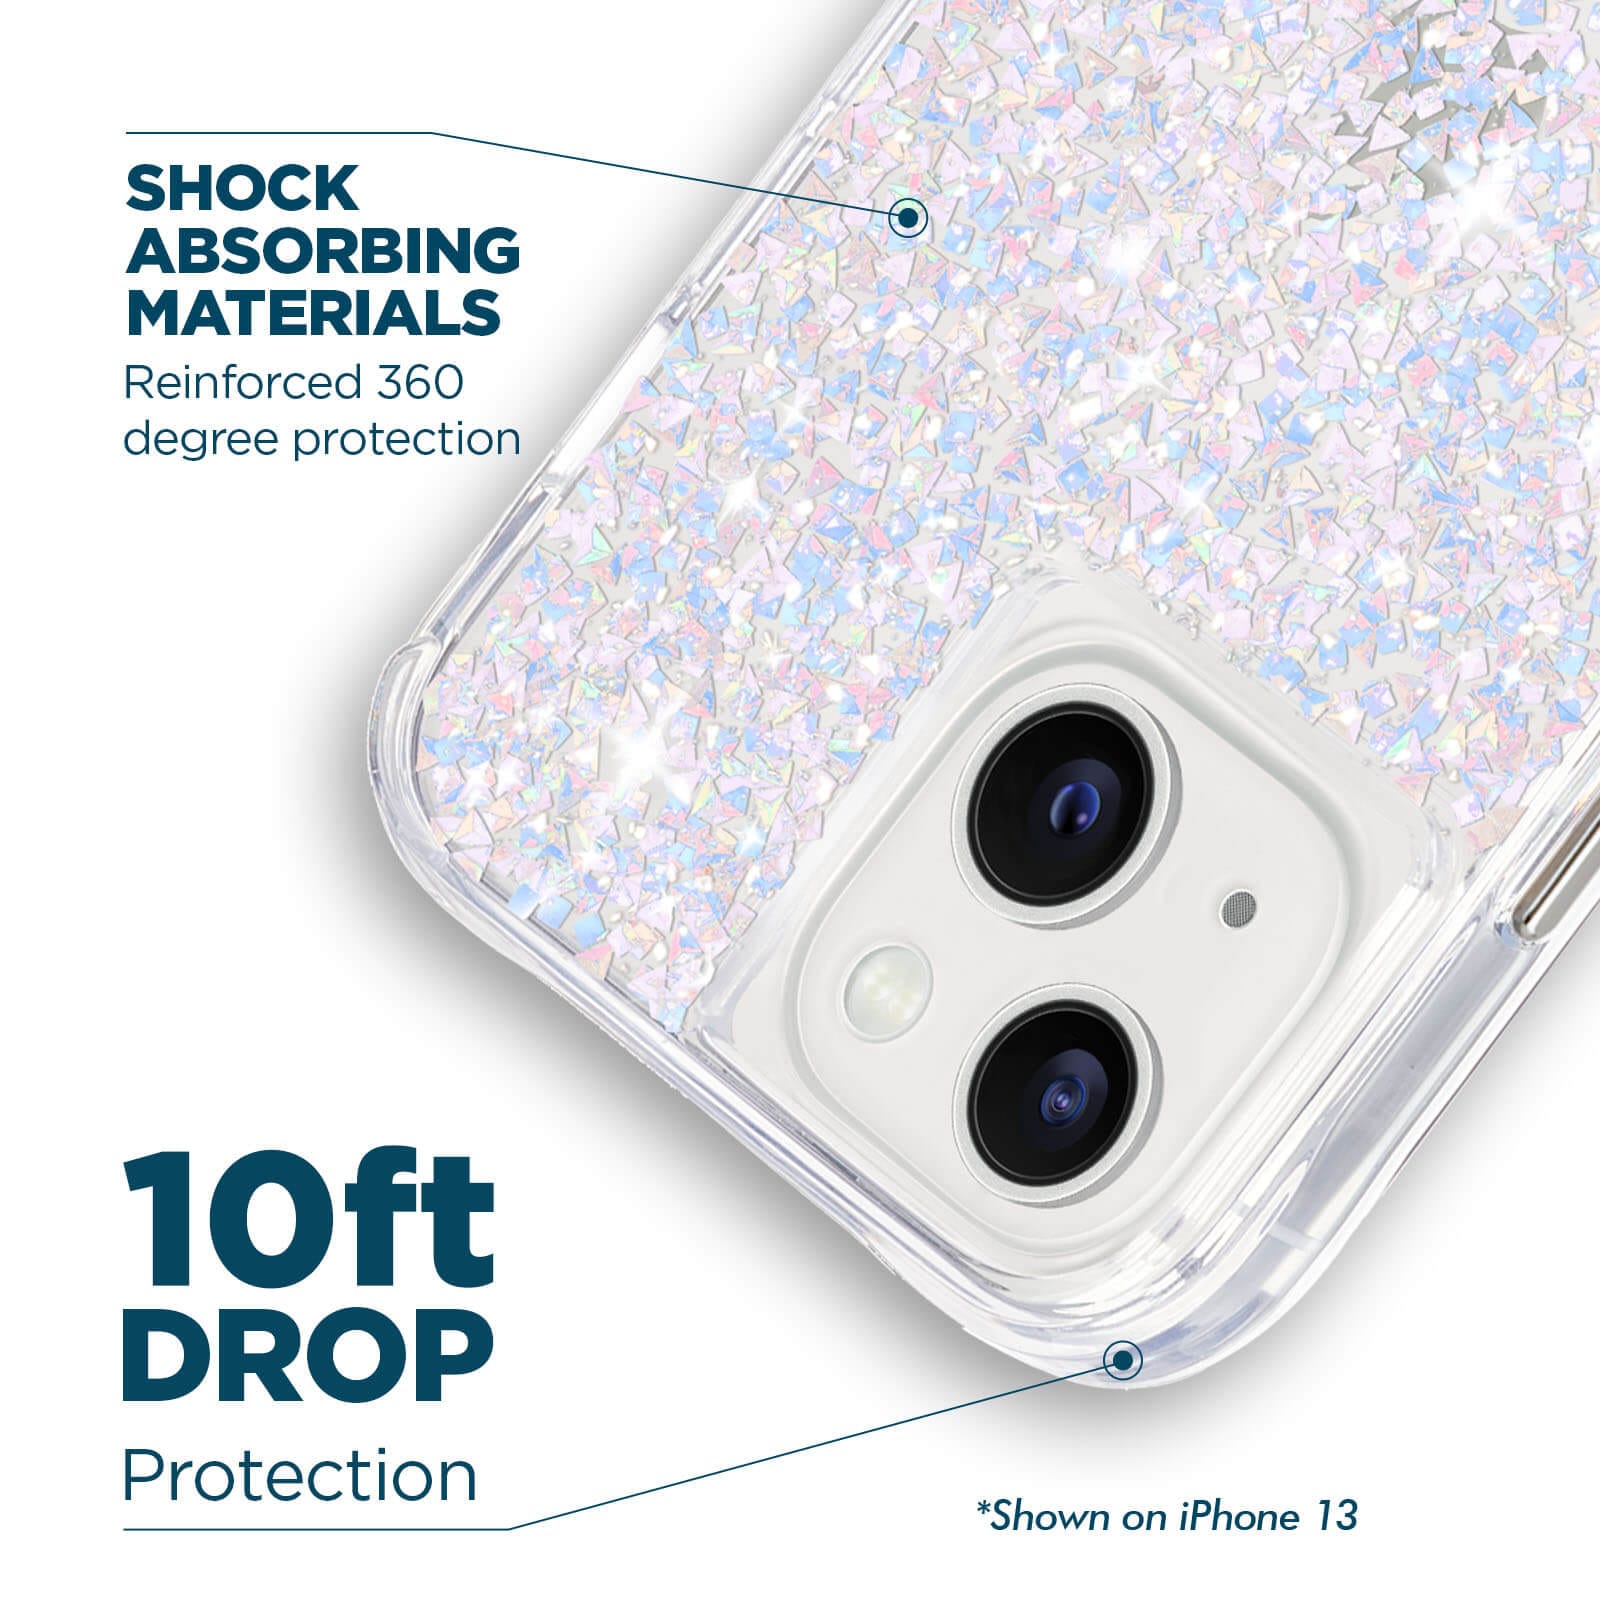 Shock absorbing materials reinforced 360 degree protection. 10ft drop protection. *Shown on iPhone 13. color::Twinkle Diamond